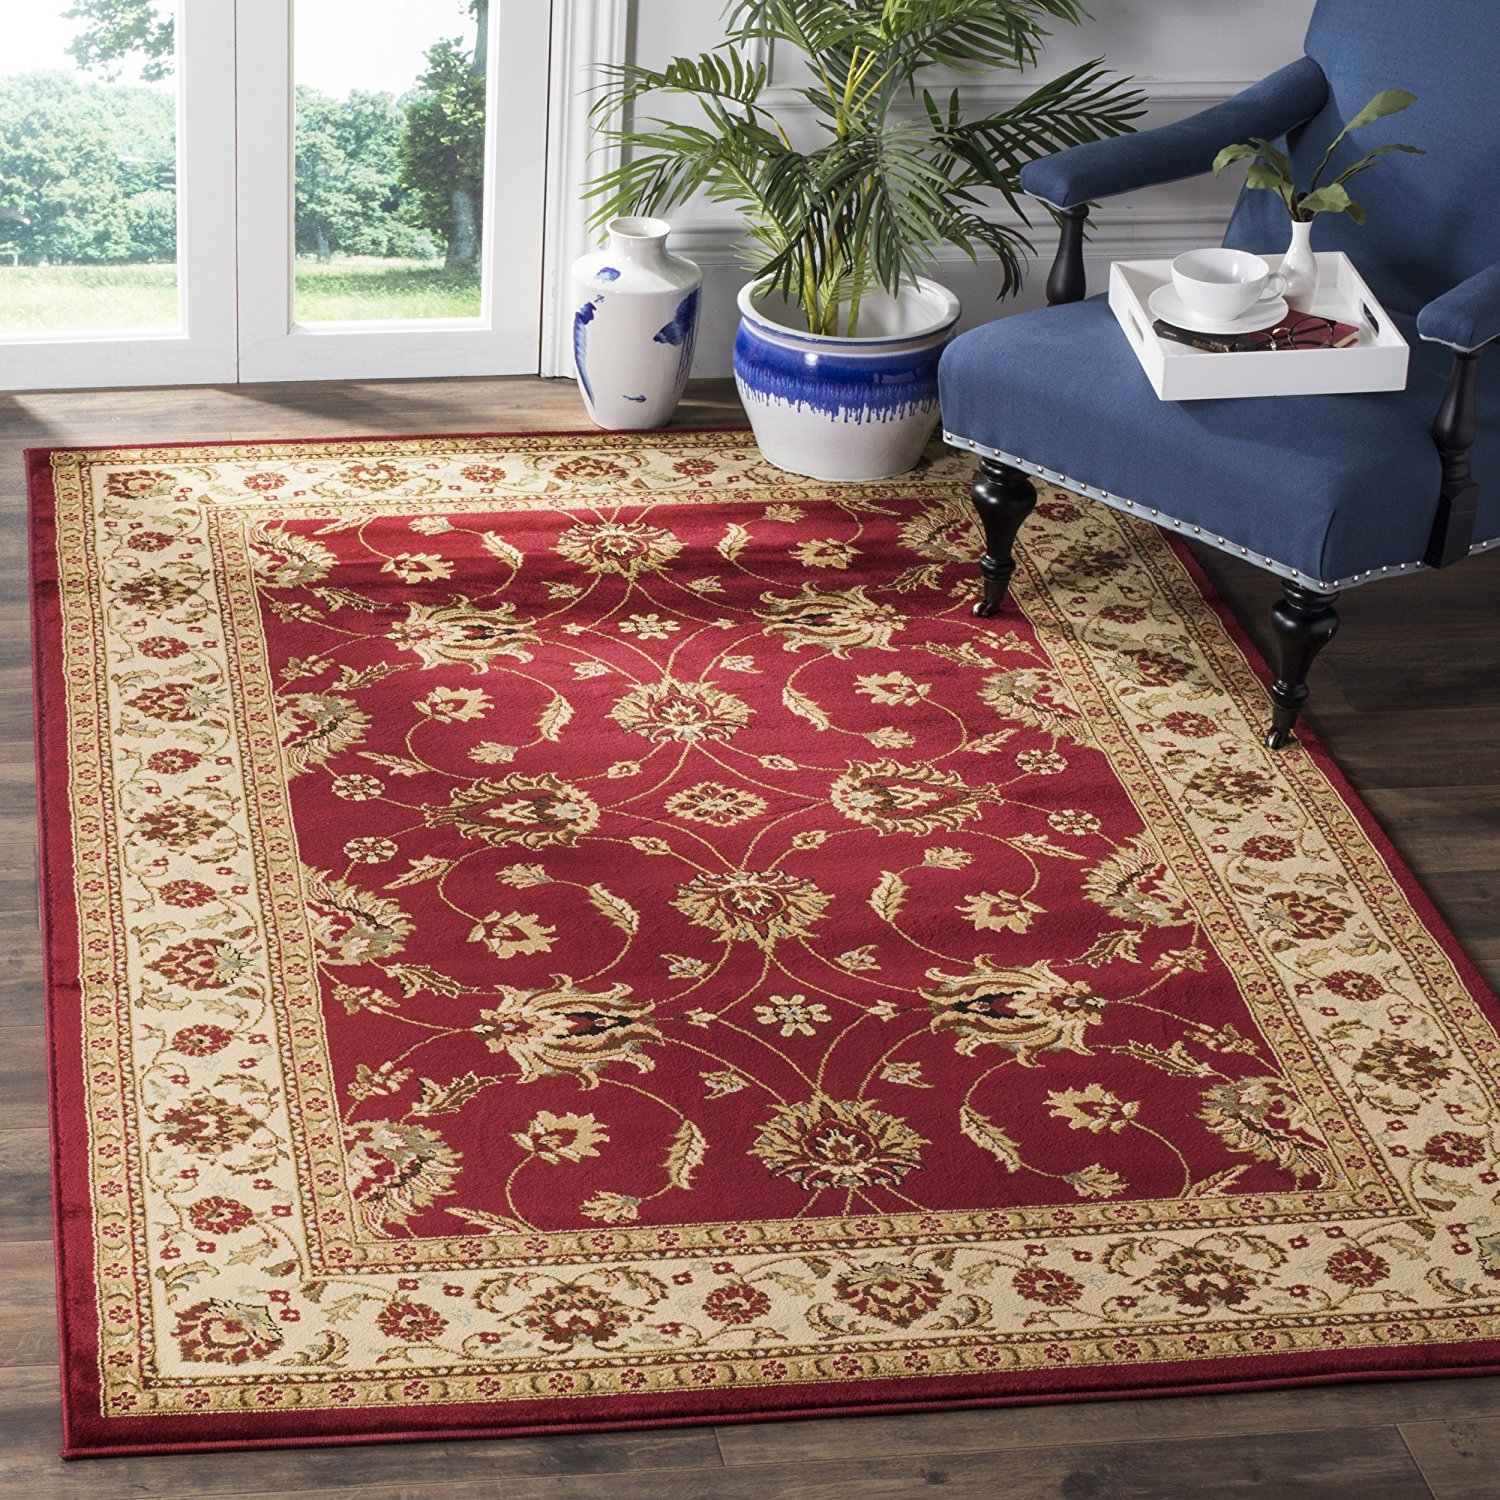 Safavieh Lyndhurst Collection LNH553-4012 Traditional Floral Red and Ivory Area Rug (5'3" x 7'6")